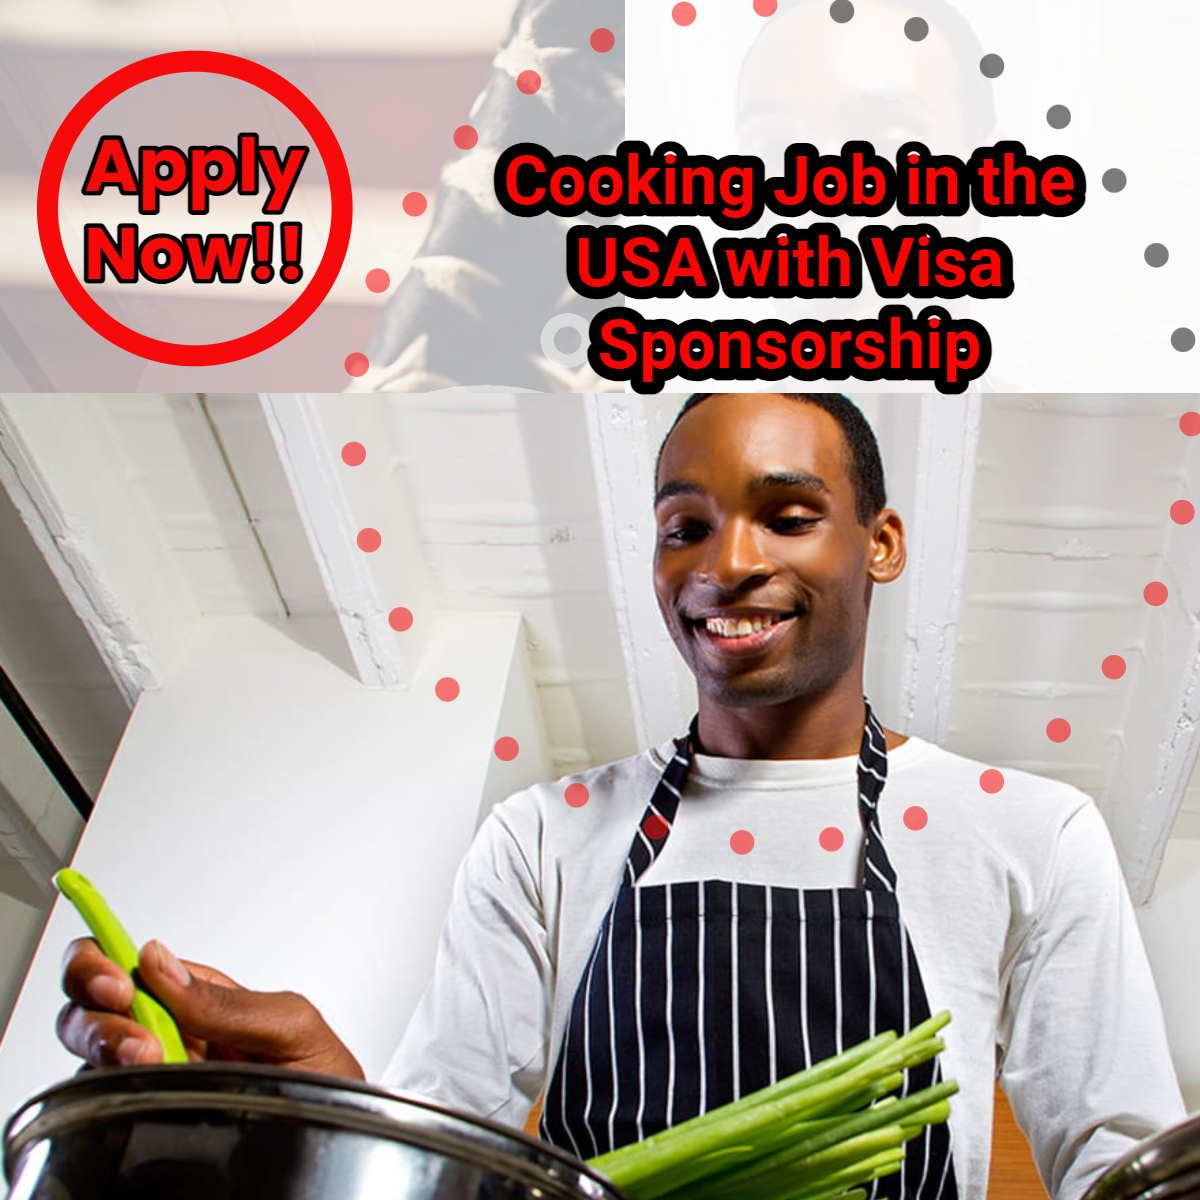 Cooking Job in the USA with Visa Sponsorship